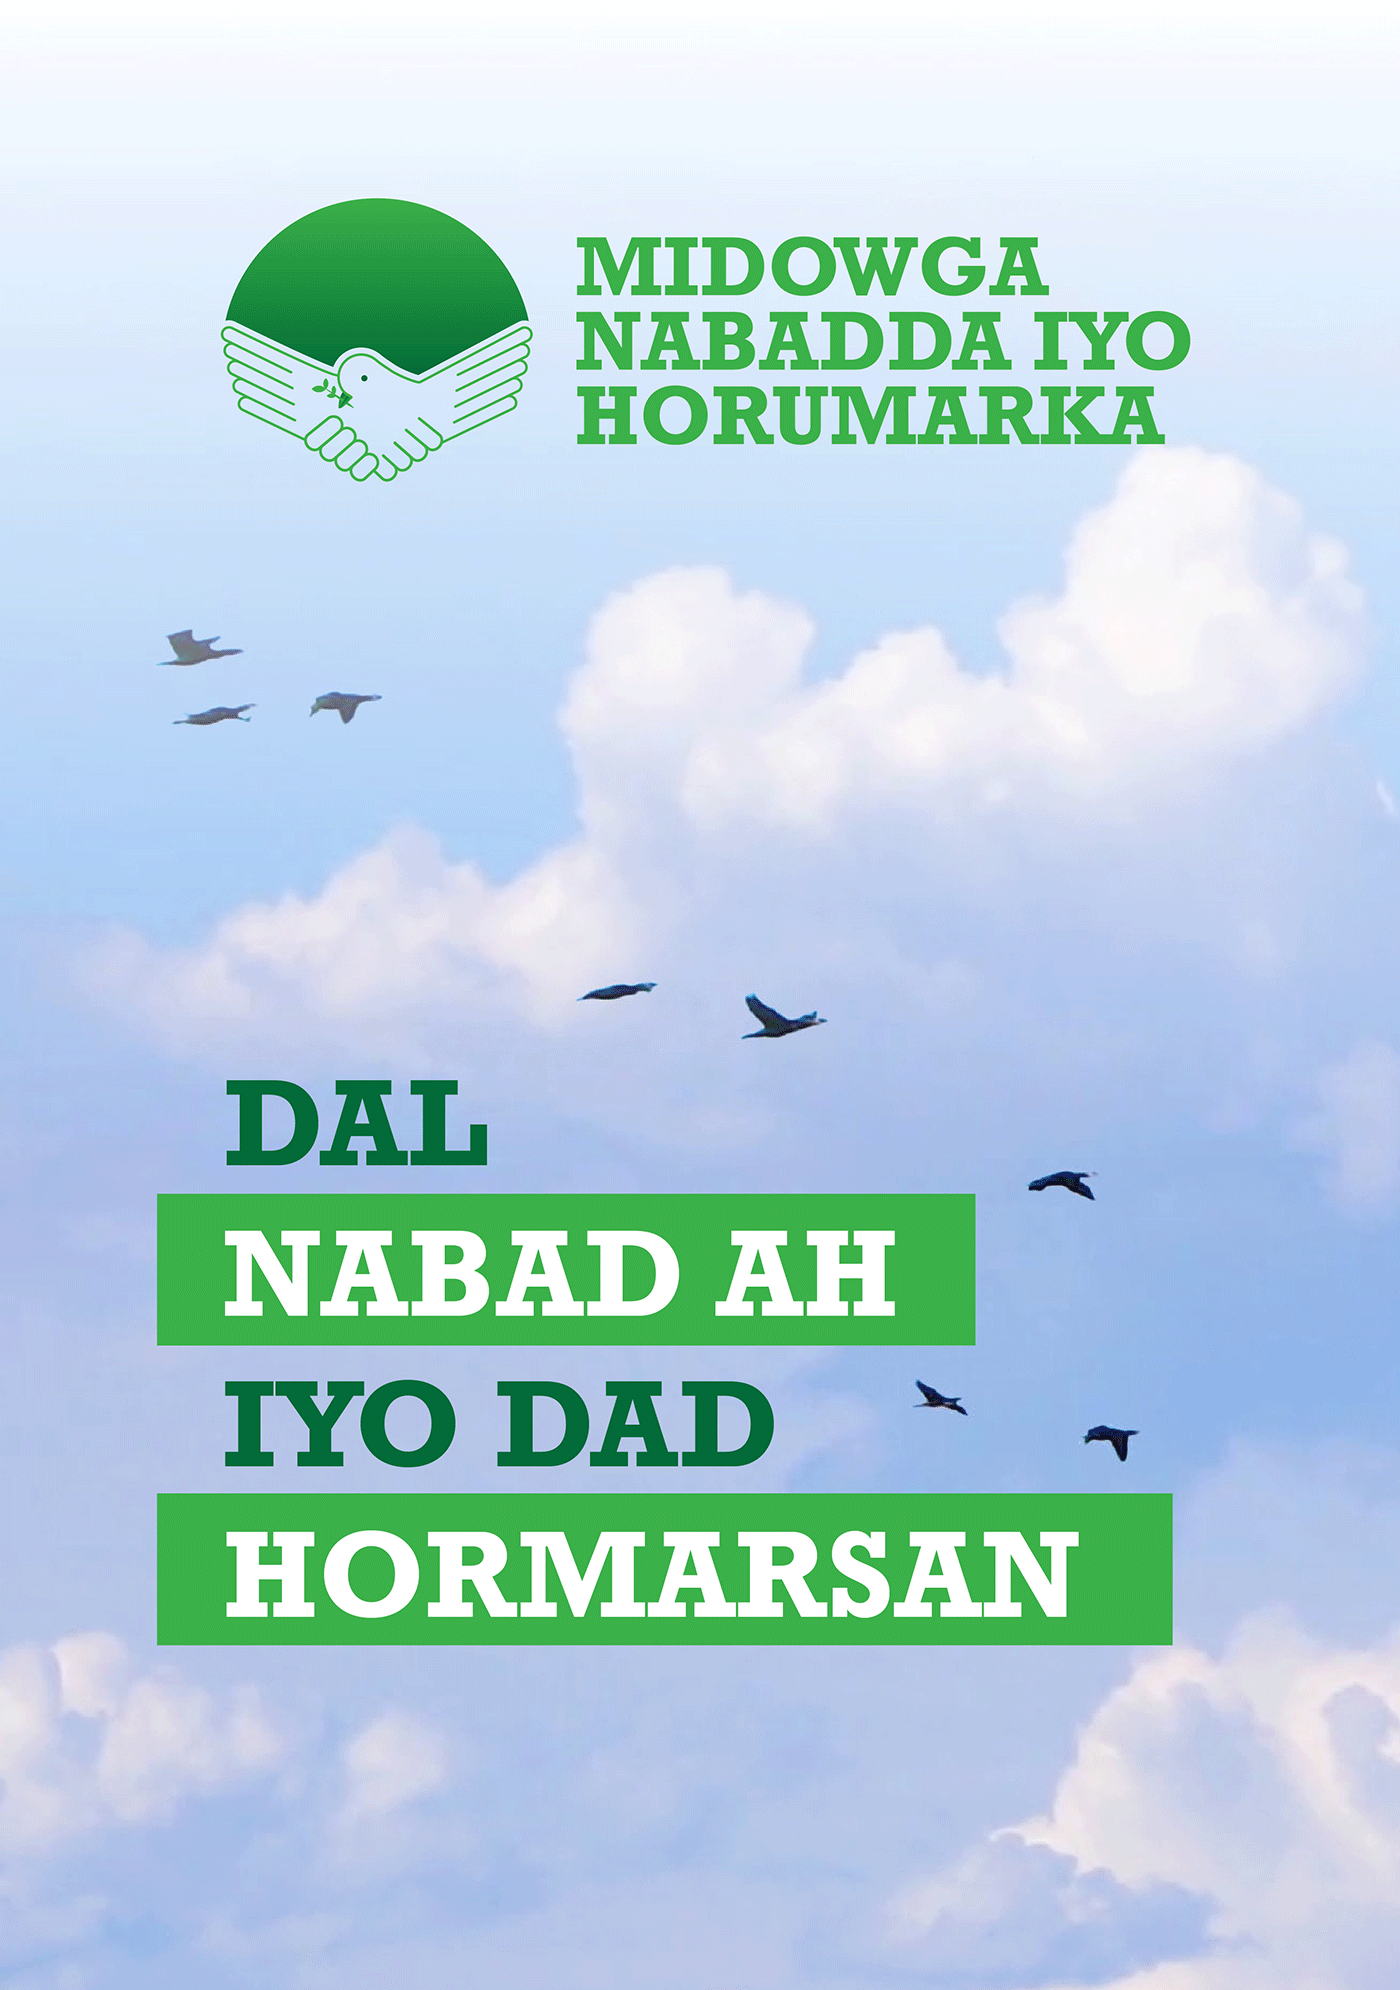 UPD Party Political party party logo somalia Mogadishu UPD Party Somalia political branding politics